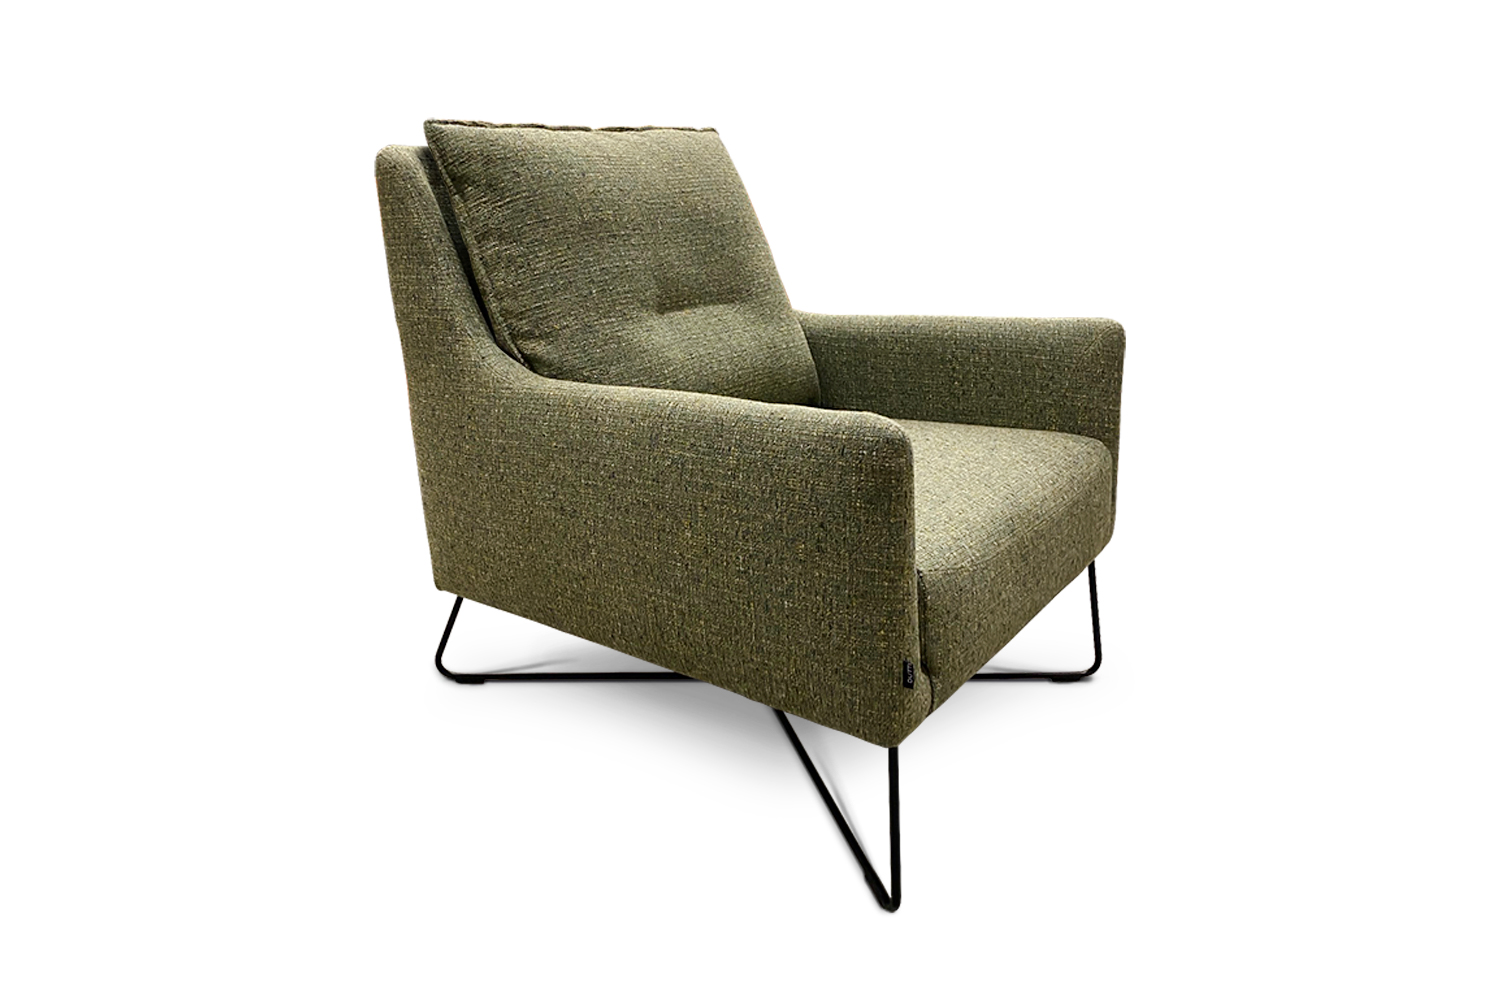 In picture: Sion chair. Fabric: Matuu 10. Legs: Sion metal legs.